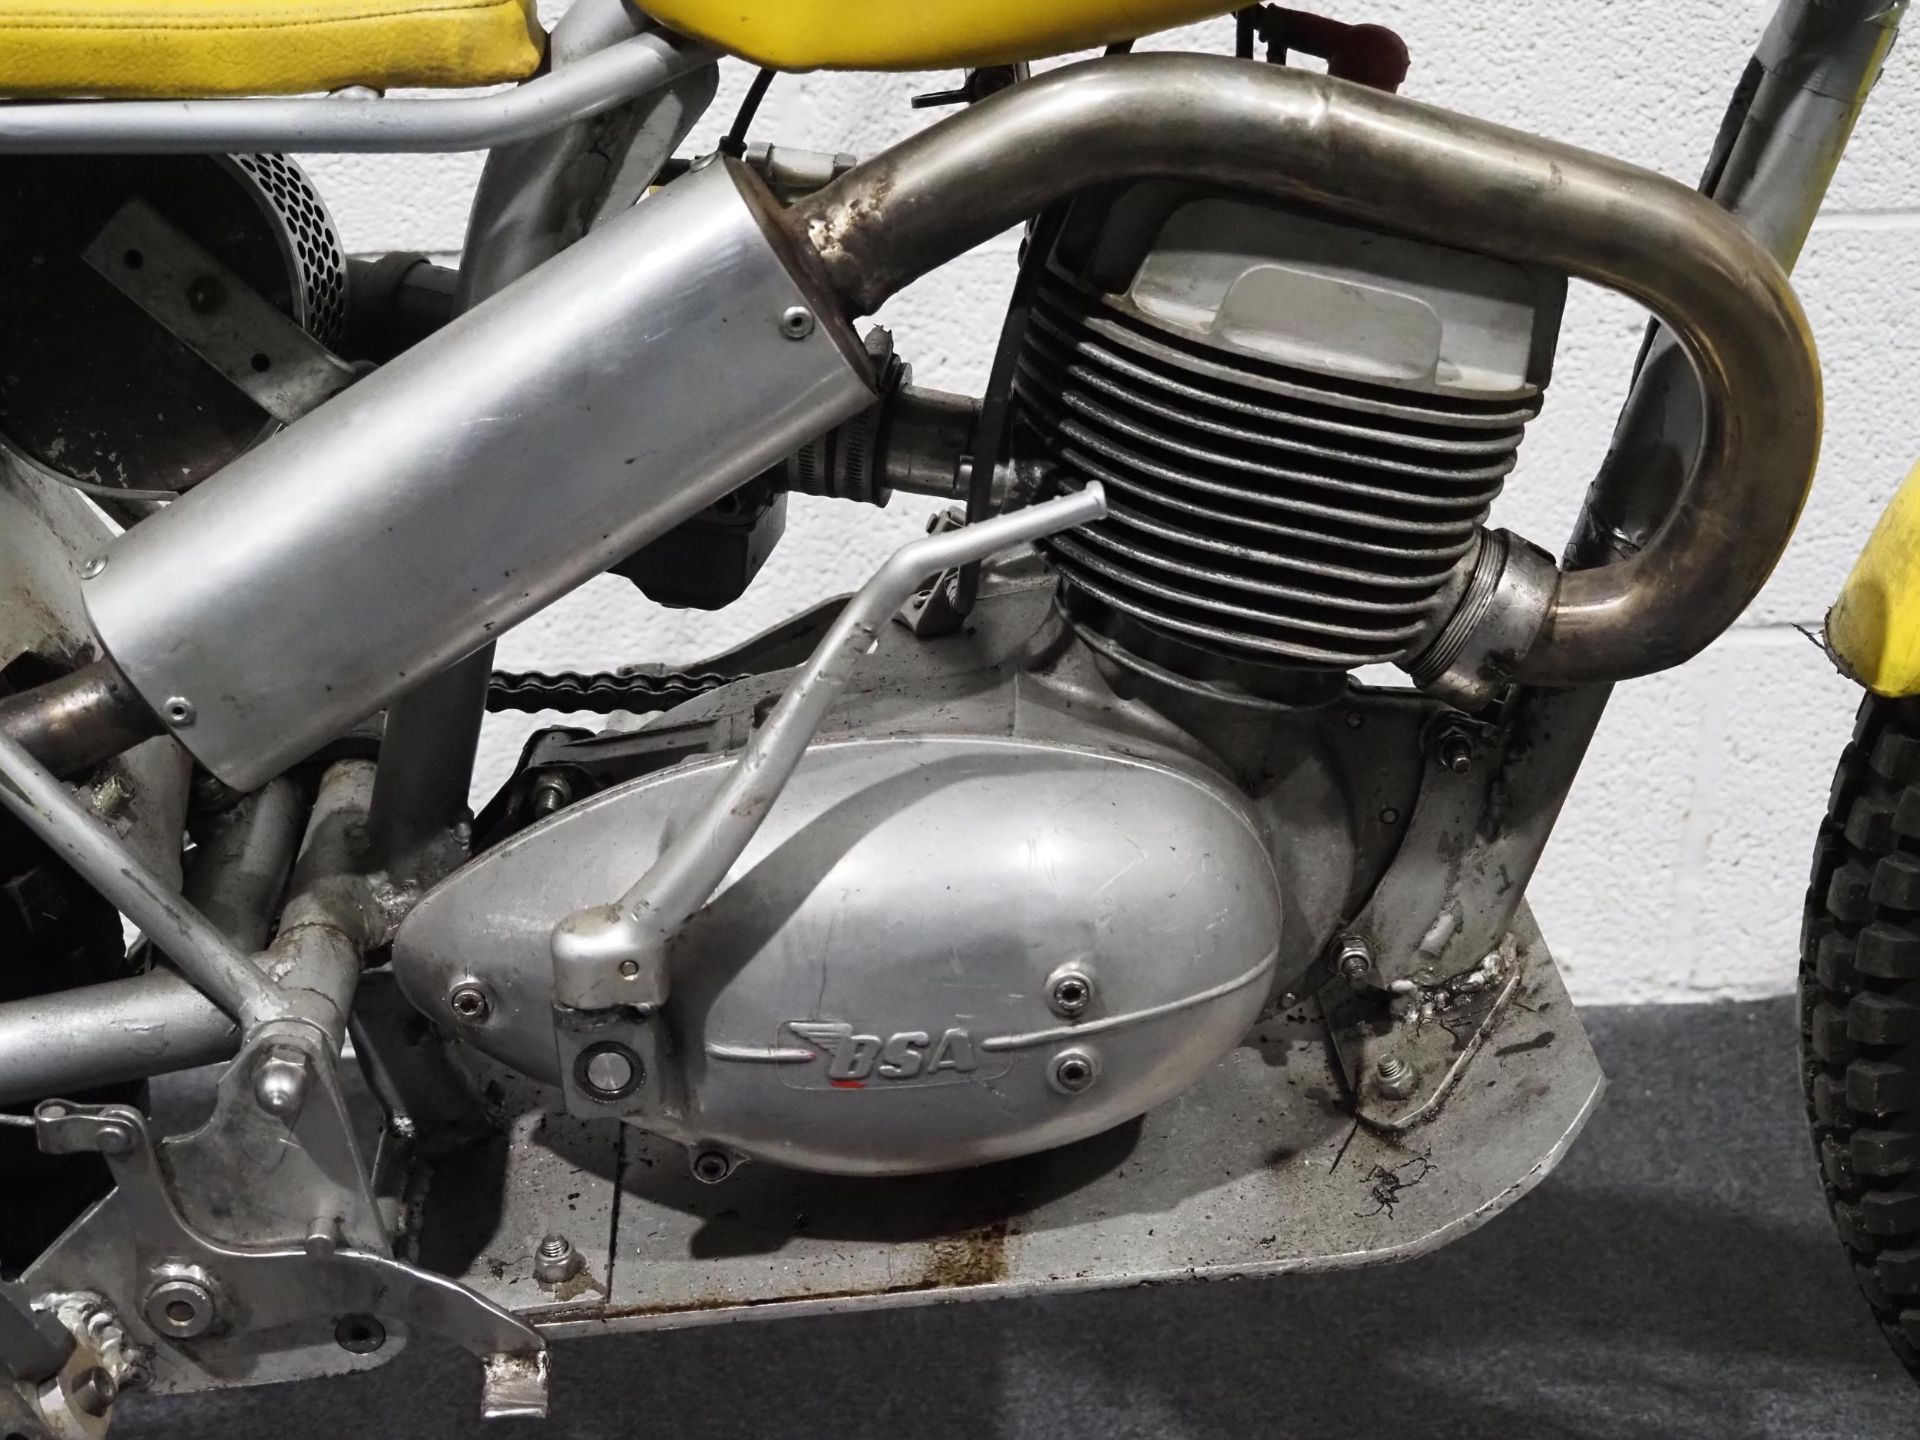 BSA Bantam trials motorcycle. 175cc Engine no. CEO7780B175 Property of a deceased estate. This - Image 4 of 5